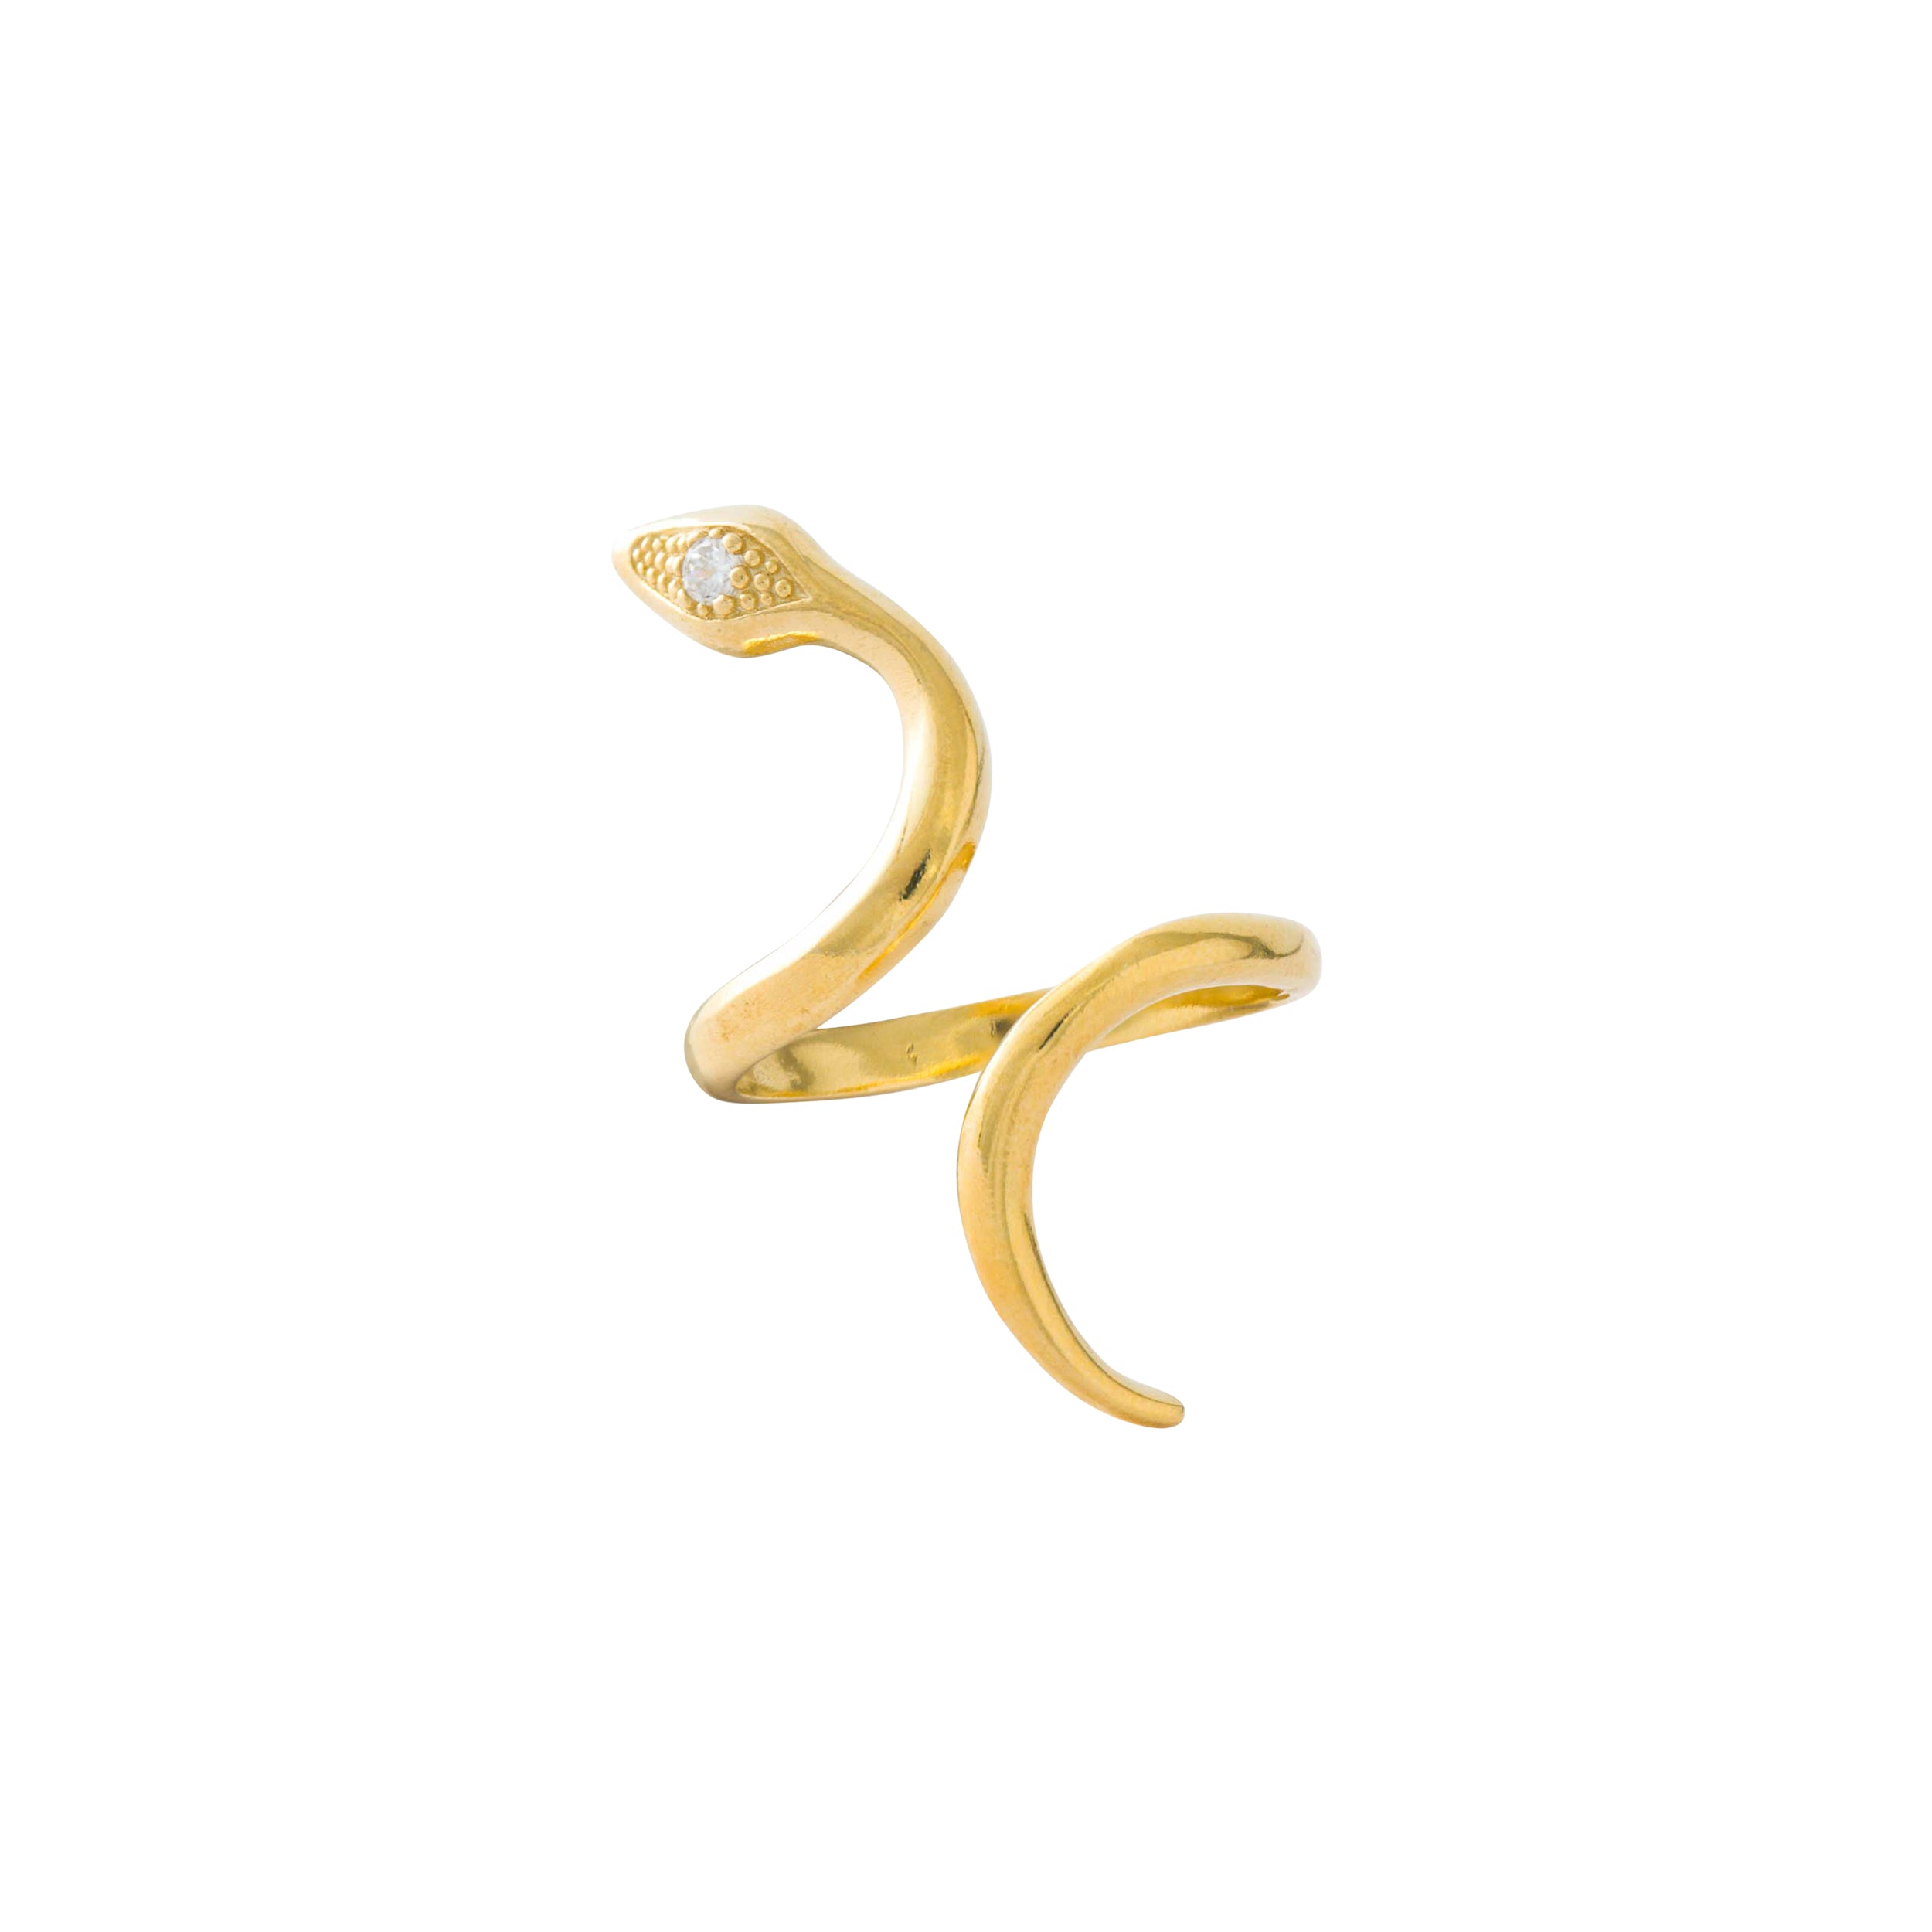 GOLD TWISTED SERPENT RING